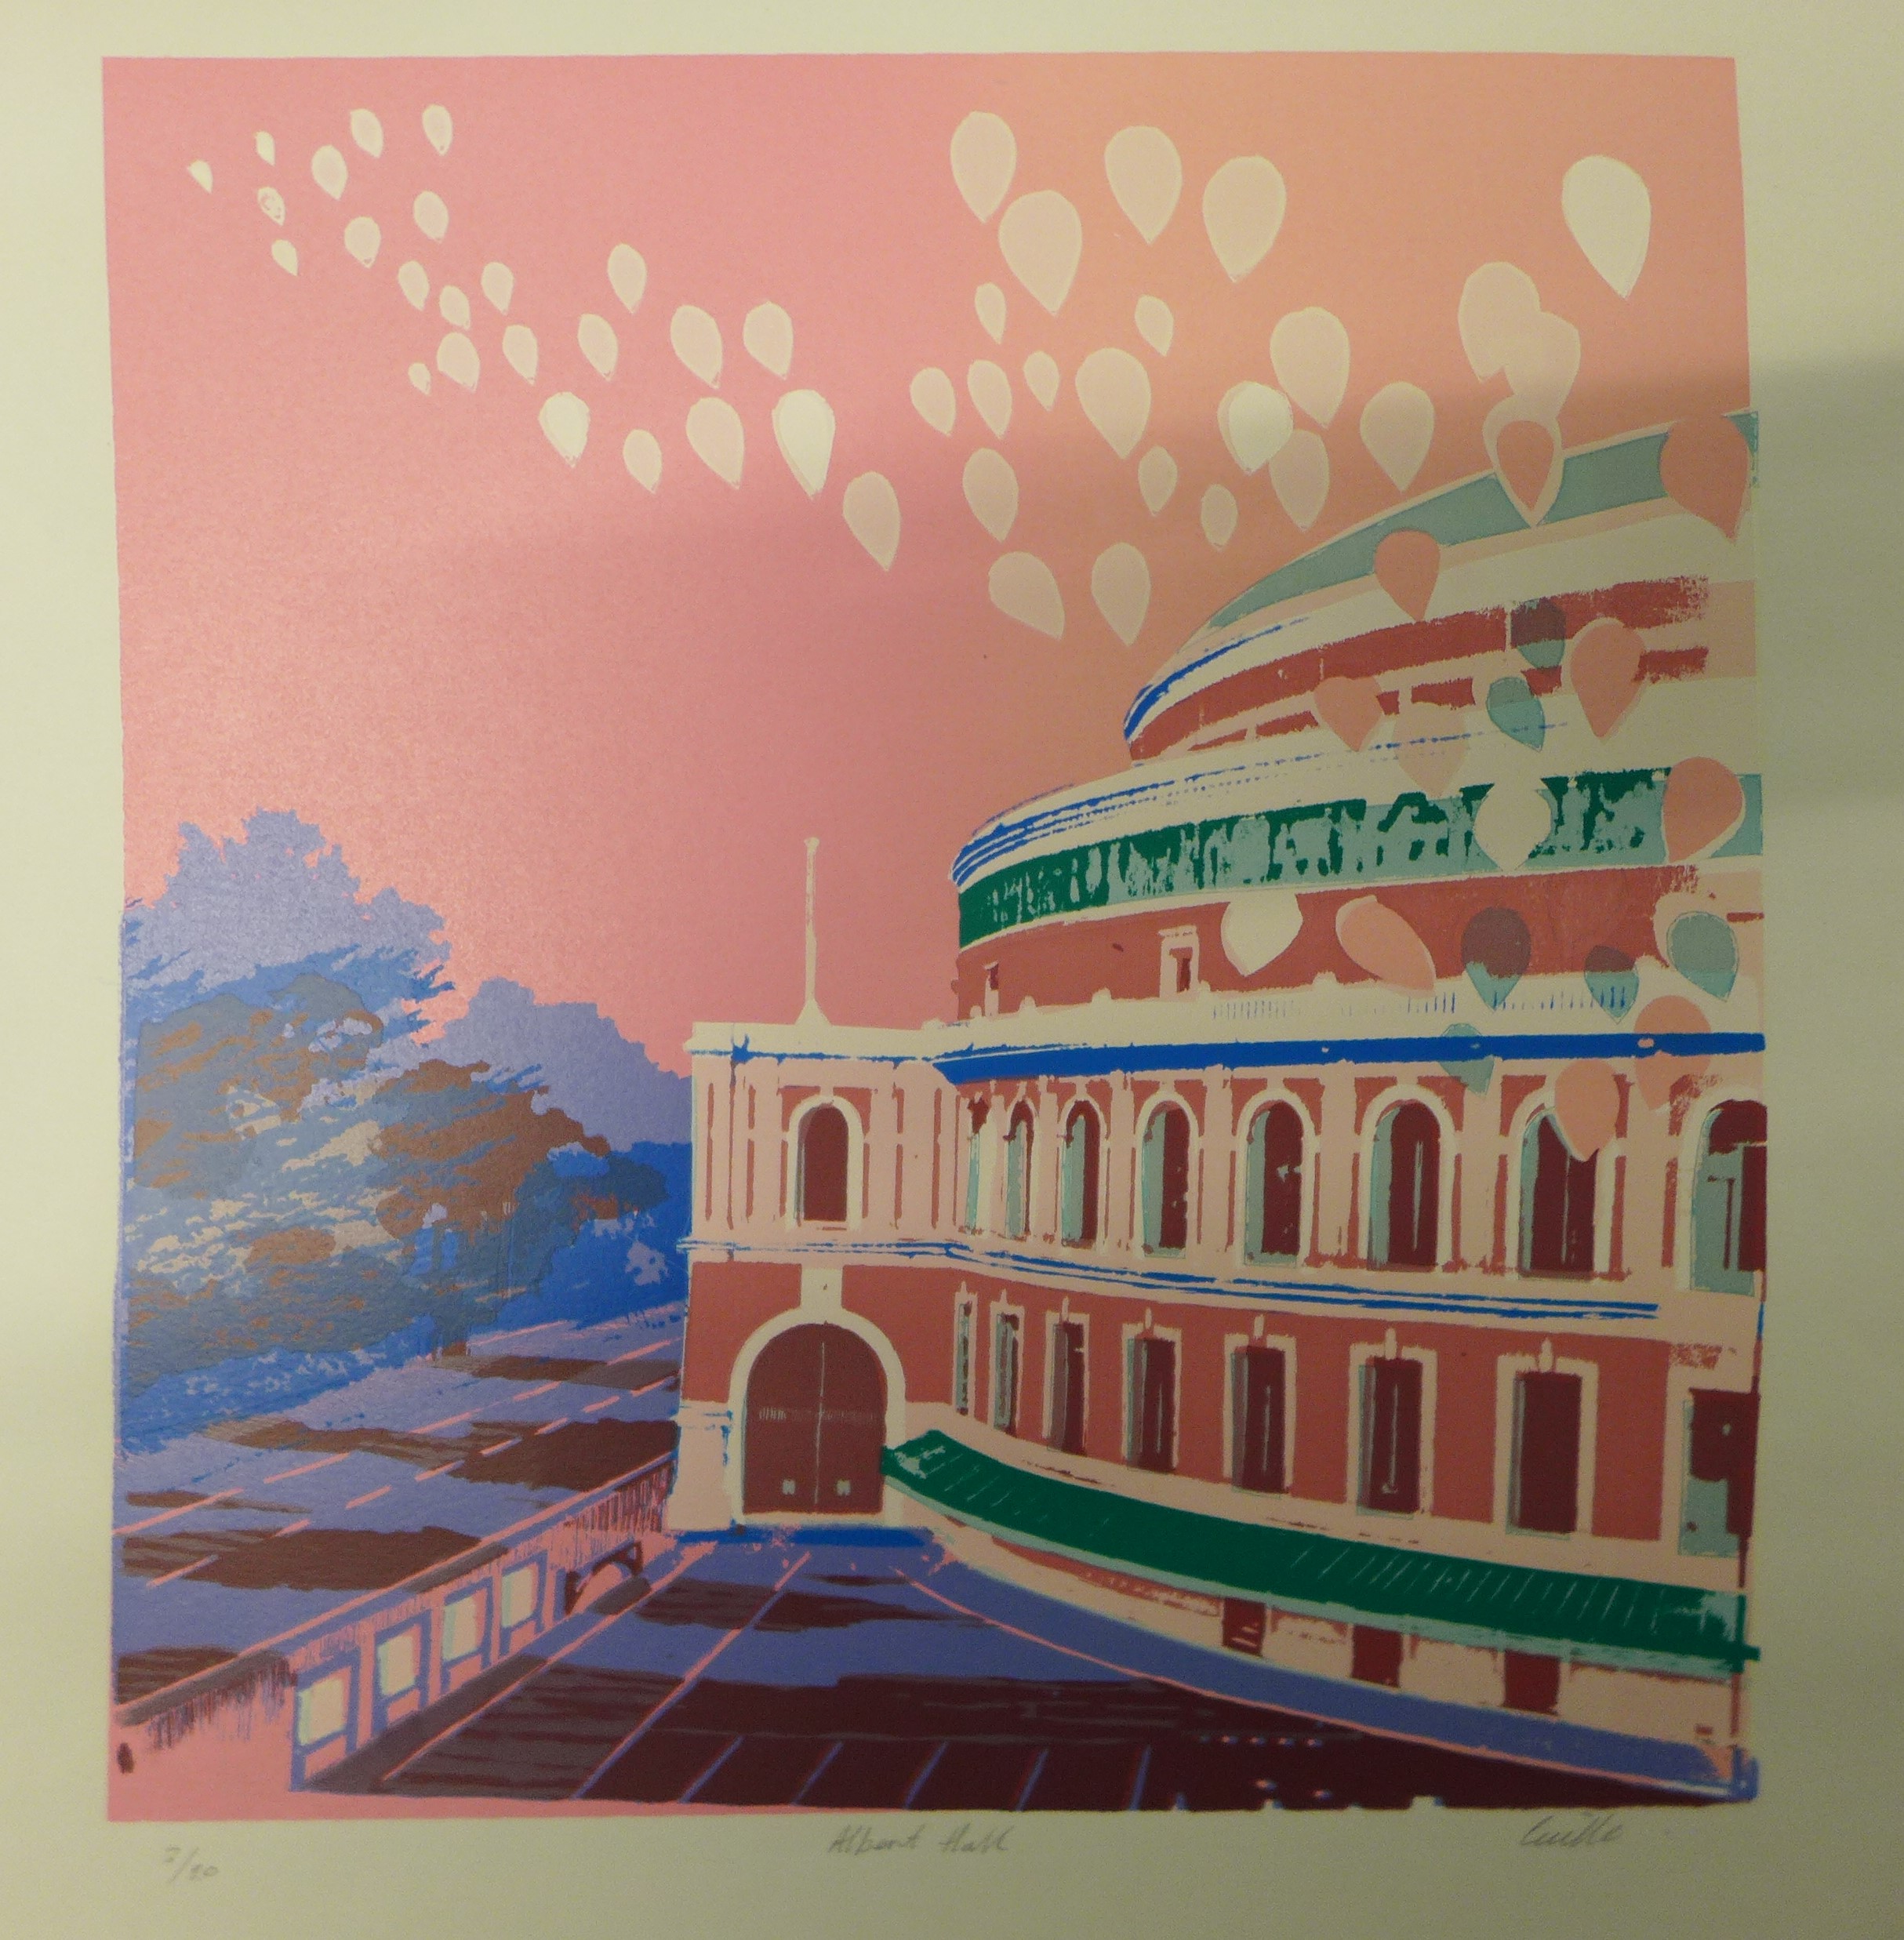 Pamela Guille, Albert Hall, signed limited edition screen print, no. 3/20, 54 x 42cms, unframed - Image 2 of 2